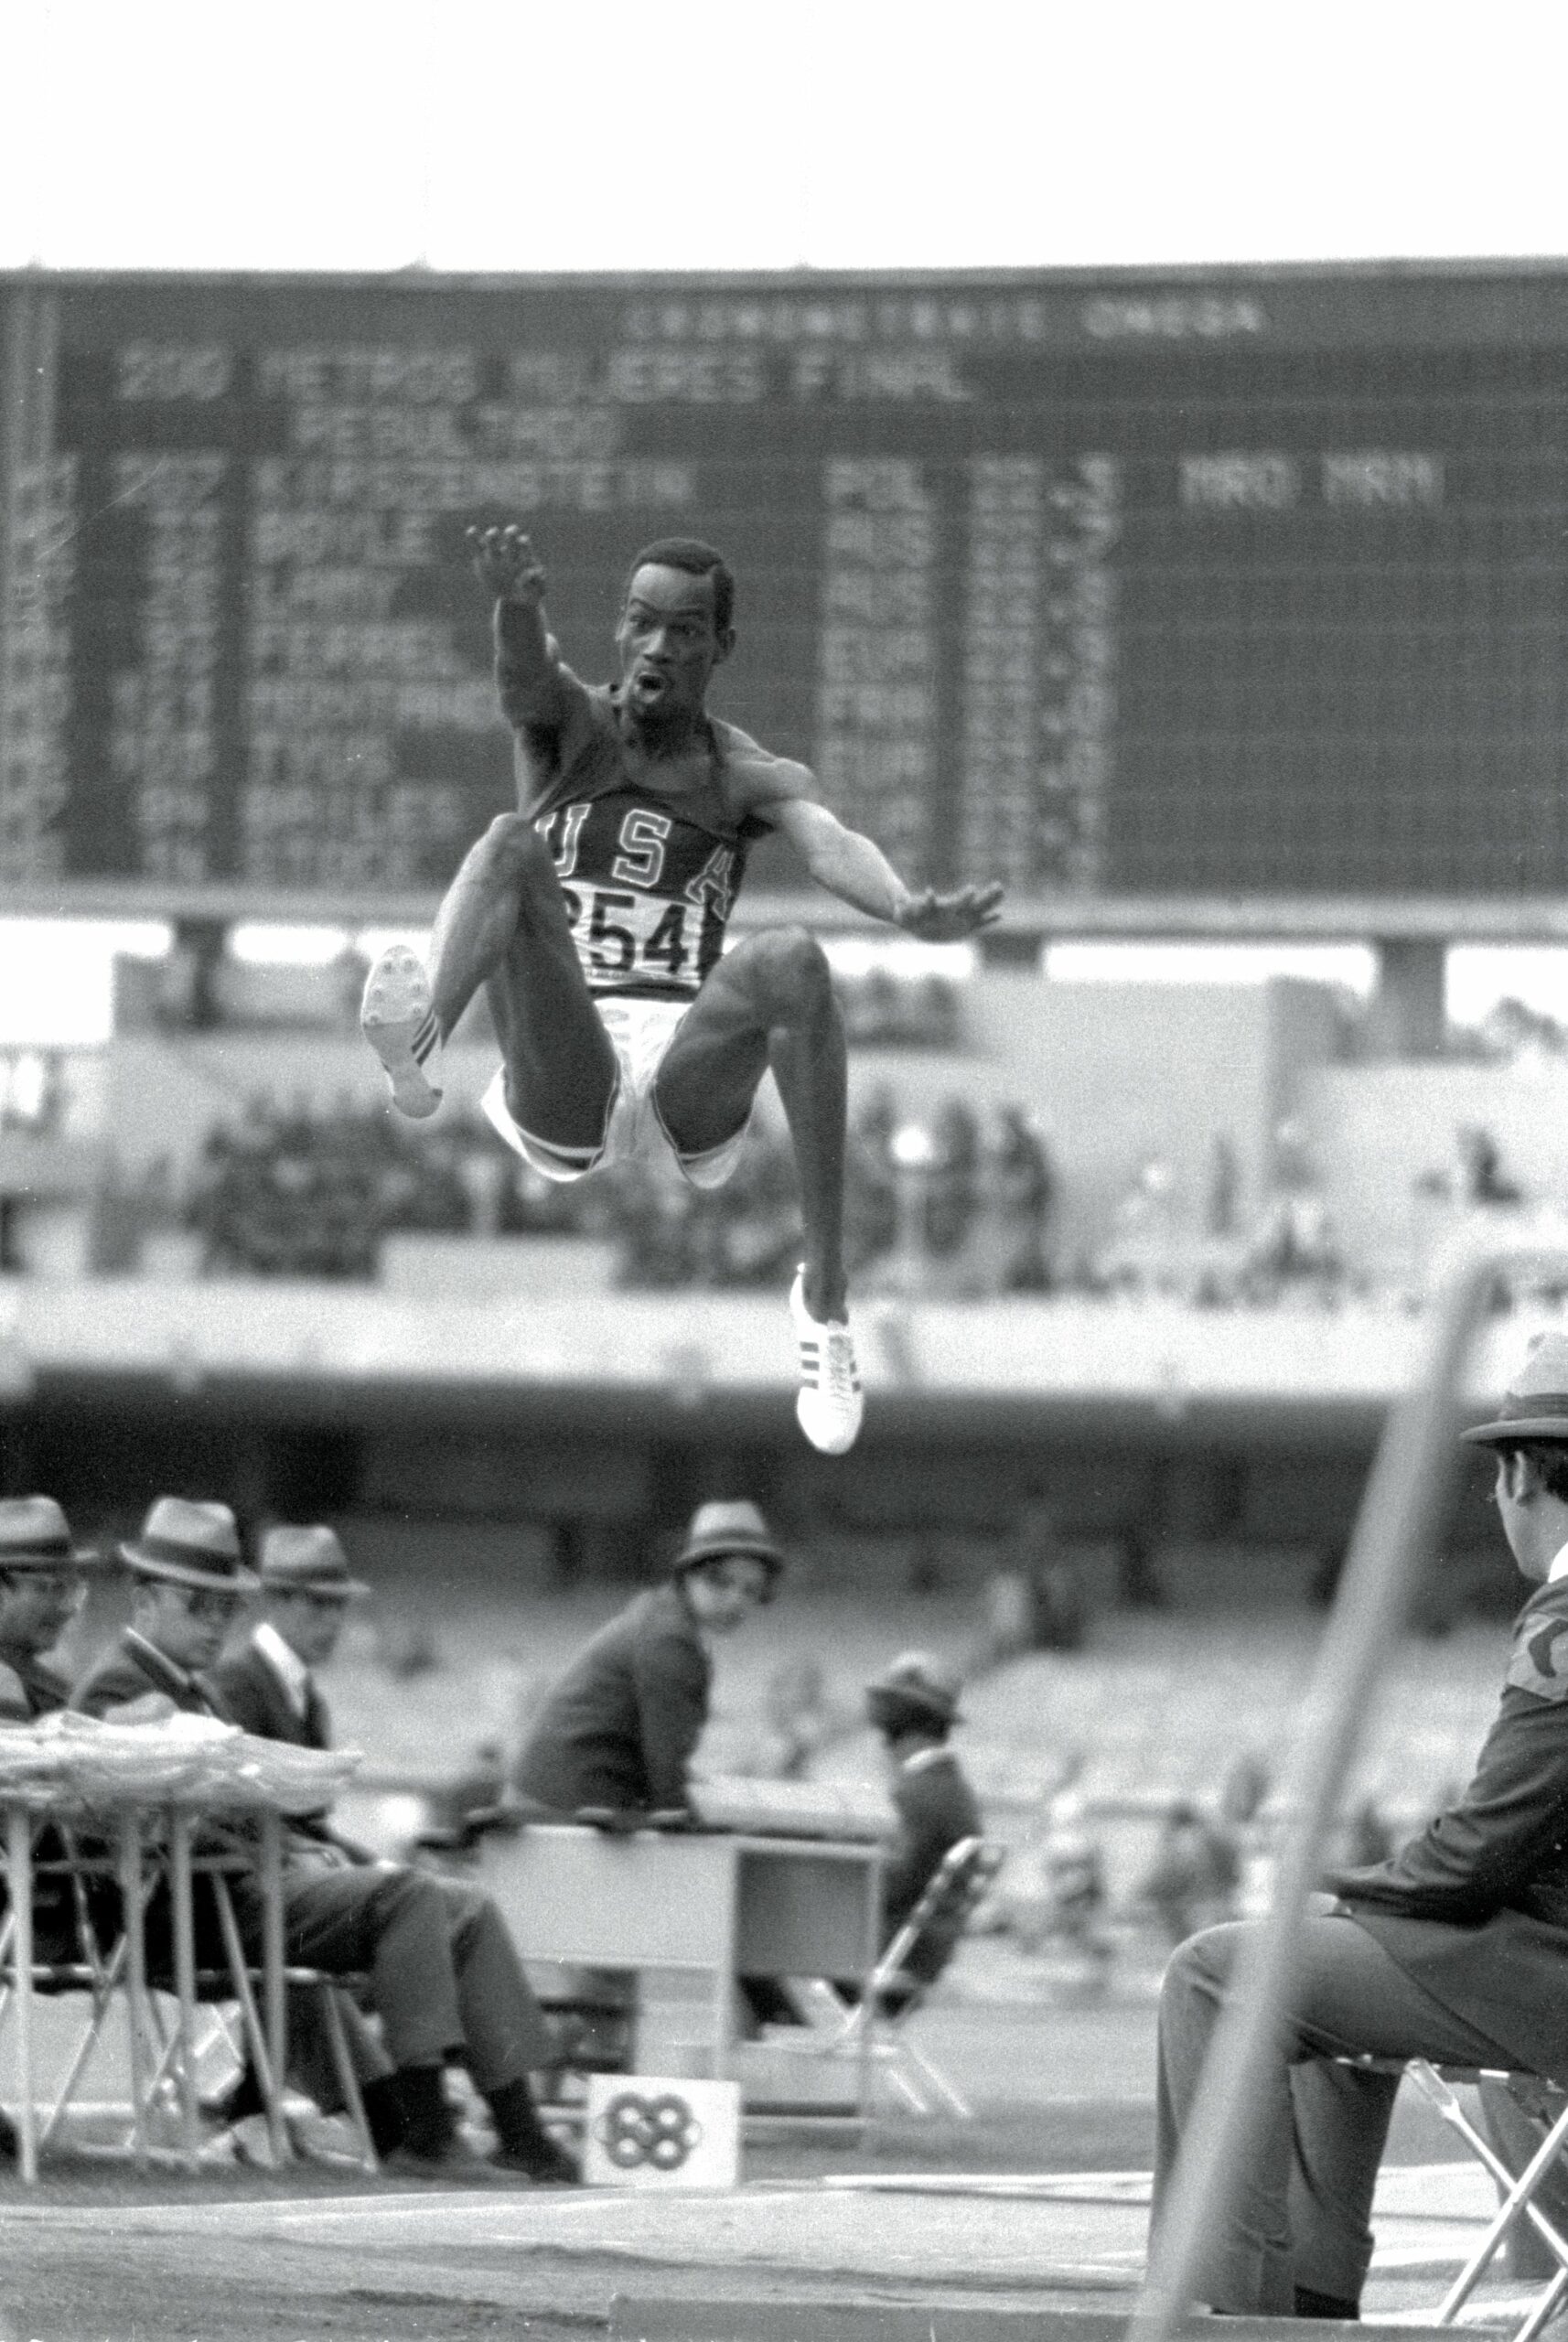 18 Oct 1968: Bob Beamon #254 of the USA breaking the Long Jump World Record during the 1968 Olympic Games in Mexico City, Mexico. Beamon long jumped 8.9 m (29 ft 2 1/2 in), winning the gold medal and setting a new world record. It is the first jump over 28 ft. The most famous long jump ever achieved: Bob Beamon of the United States takes off for a place in sporting history as he leaps 8.90 metres at the Mexico City Games of 1968. While the middle distance runners from the low level countries floundered in the thin air of Mexico City, those in the explosive events reached new peaks, none higher than Beamon, who added 58 centimetres to the world record with a jump aided by a wind of 2 metres per second the very limit of wind assistance. In Imperial measure terms it looked even more impressive since he missed out 28 feet, taking the record to 29 ft 2 ins. Yet Beamon never again managed a jump of 27 feet. It was twelve years before anyone else reached 28 feet (8.53 metres) and the record stood until 1991 when Mike Powell of the US leapt 8.95 metres in Tokyo to win the world title. His jump was at sea level and wind assistance of 0.3mps. Mandatory Credit: Tony Duffy /Allsport